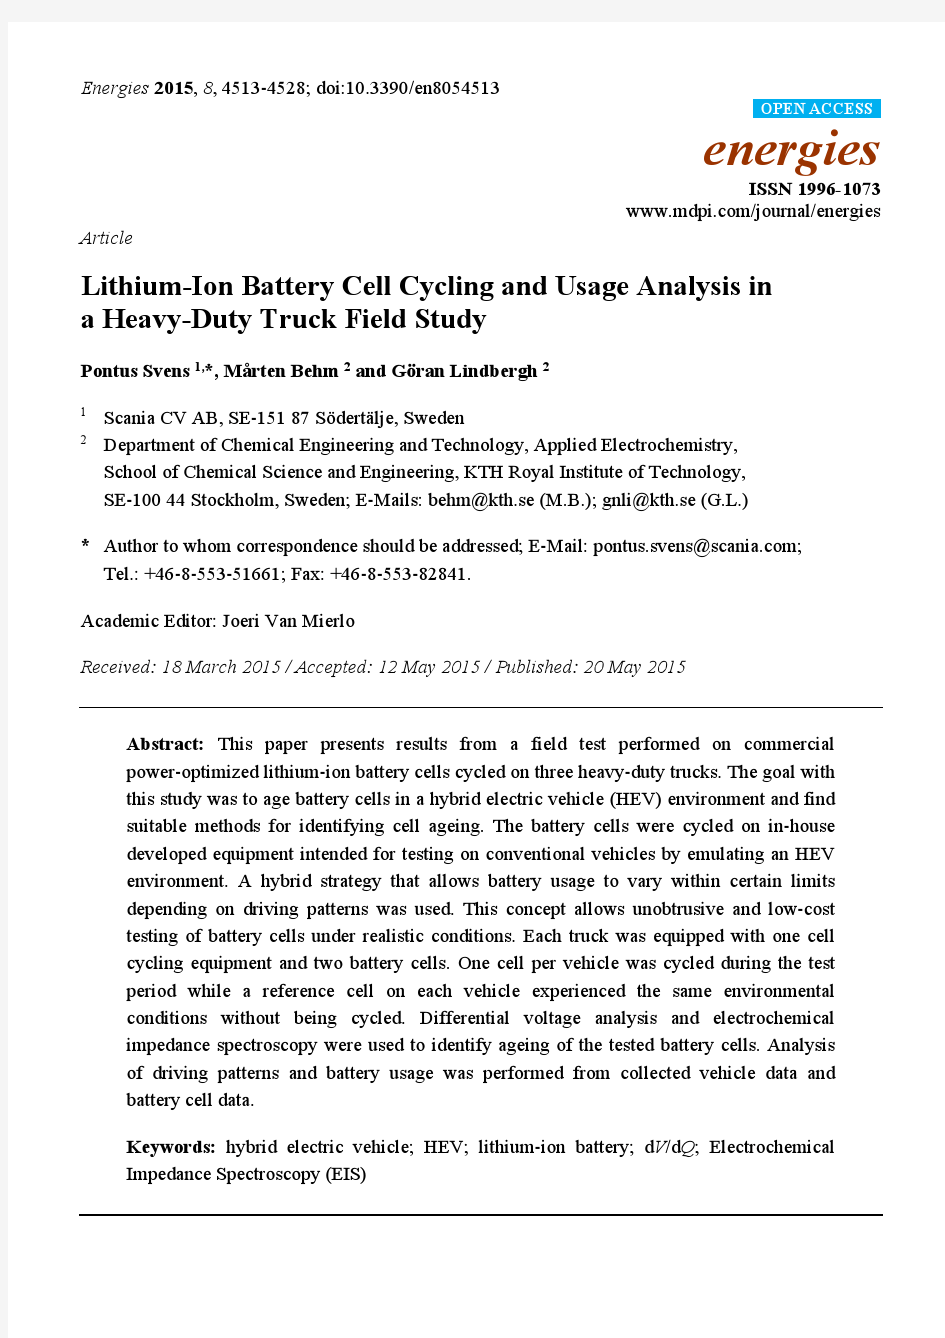 J2015-Lithium-Ion Battery Cell Cycling and Usage Analysis in a Heavy-Duty Truck Field Study